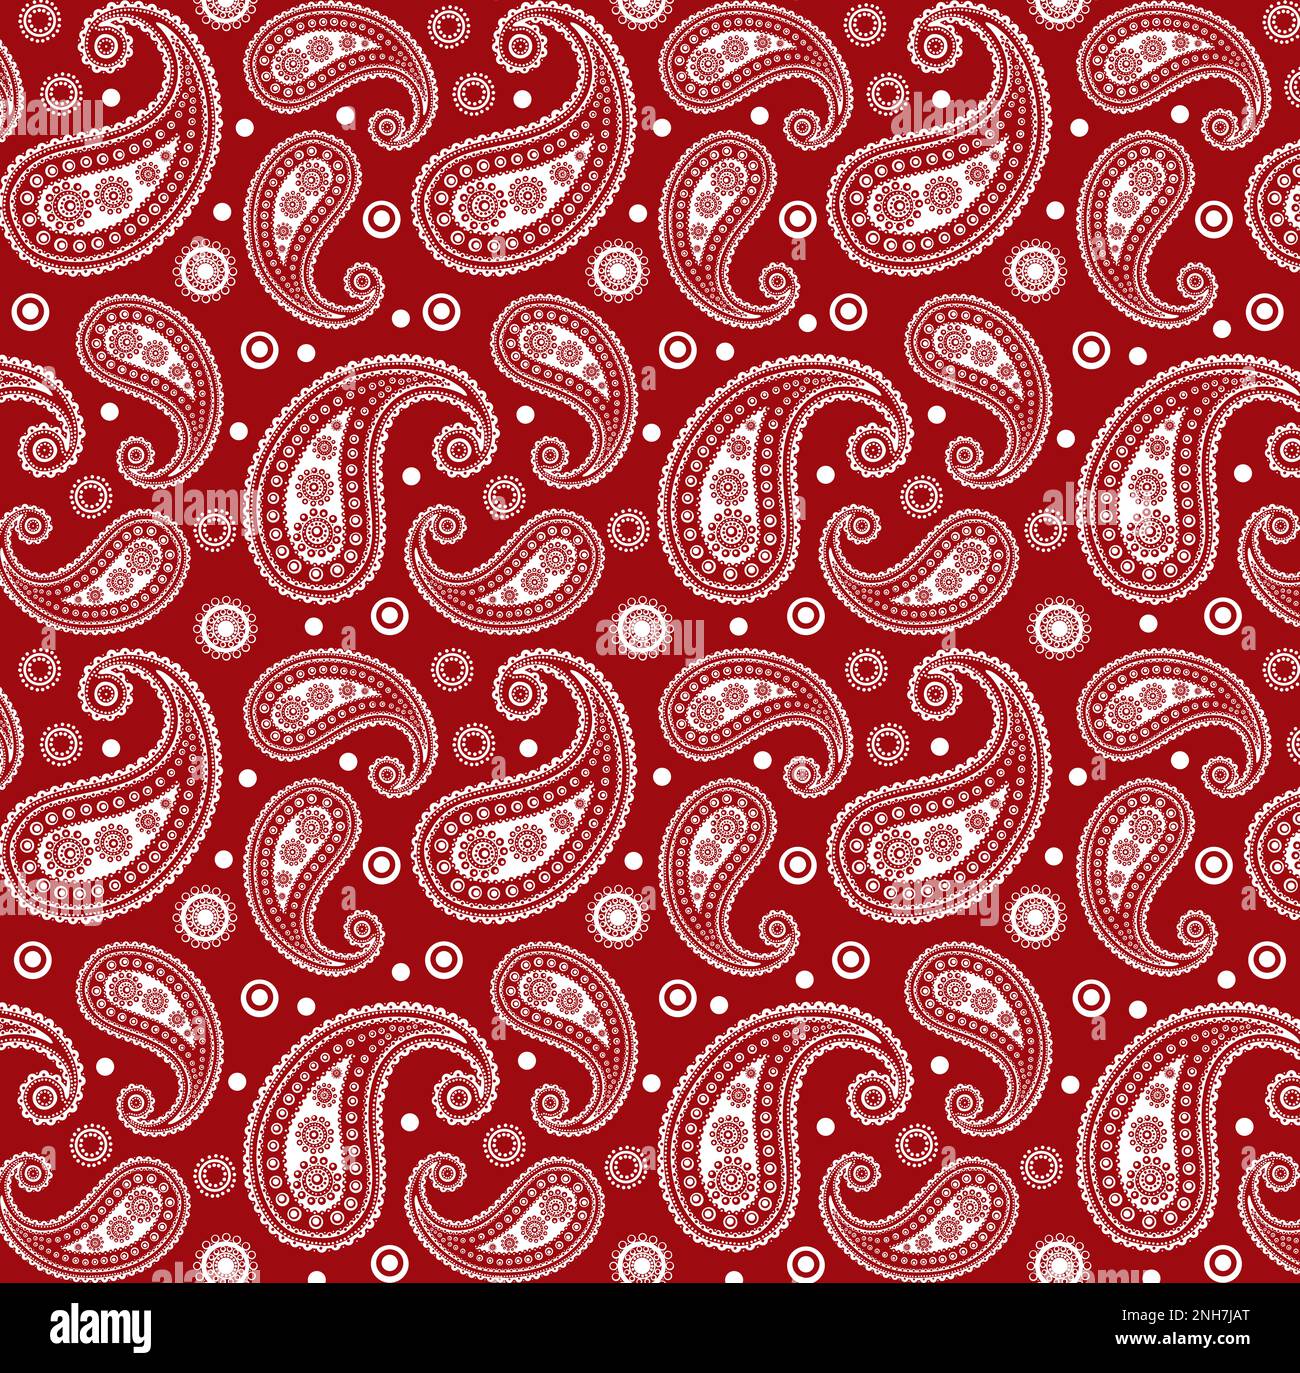 Red & White Funky 60s 70s Paisley Pattern Stock Photo